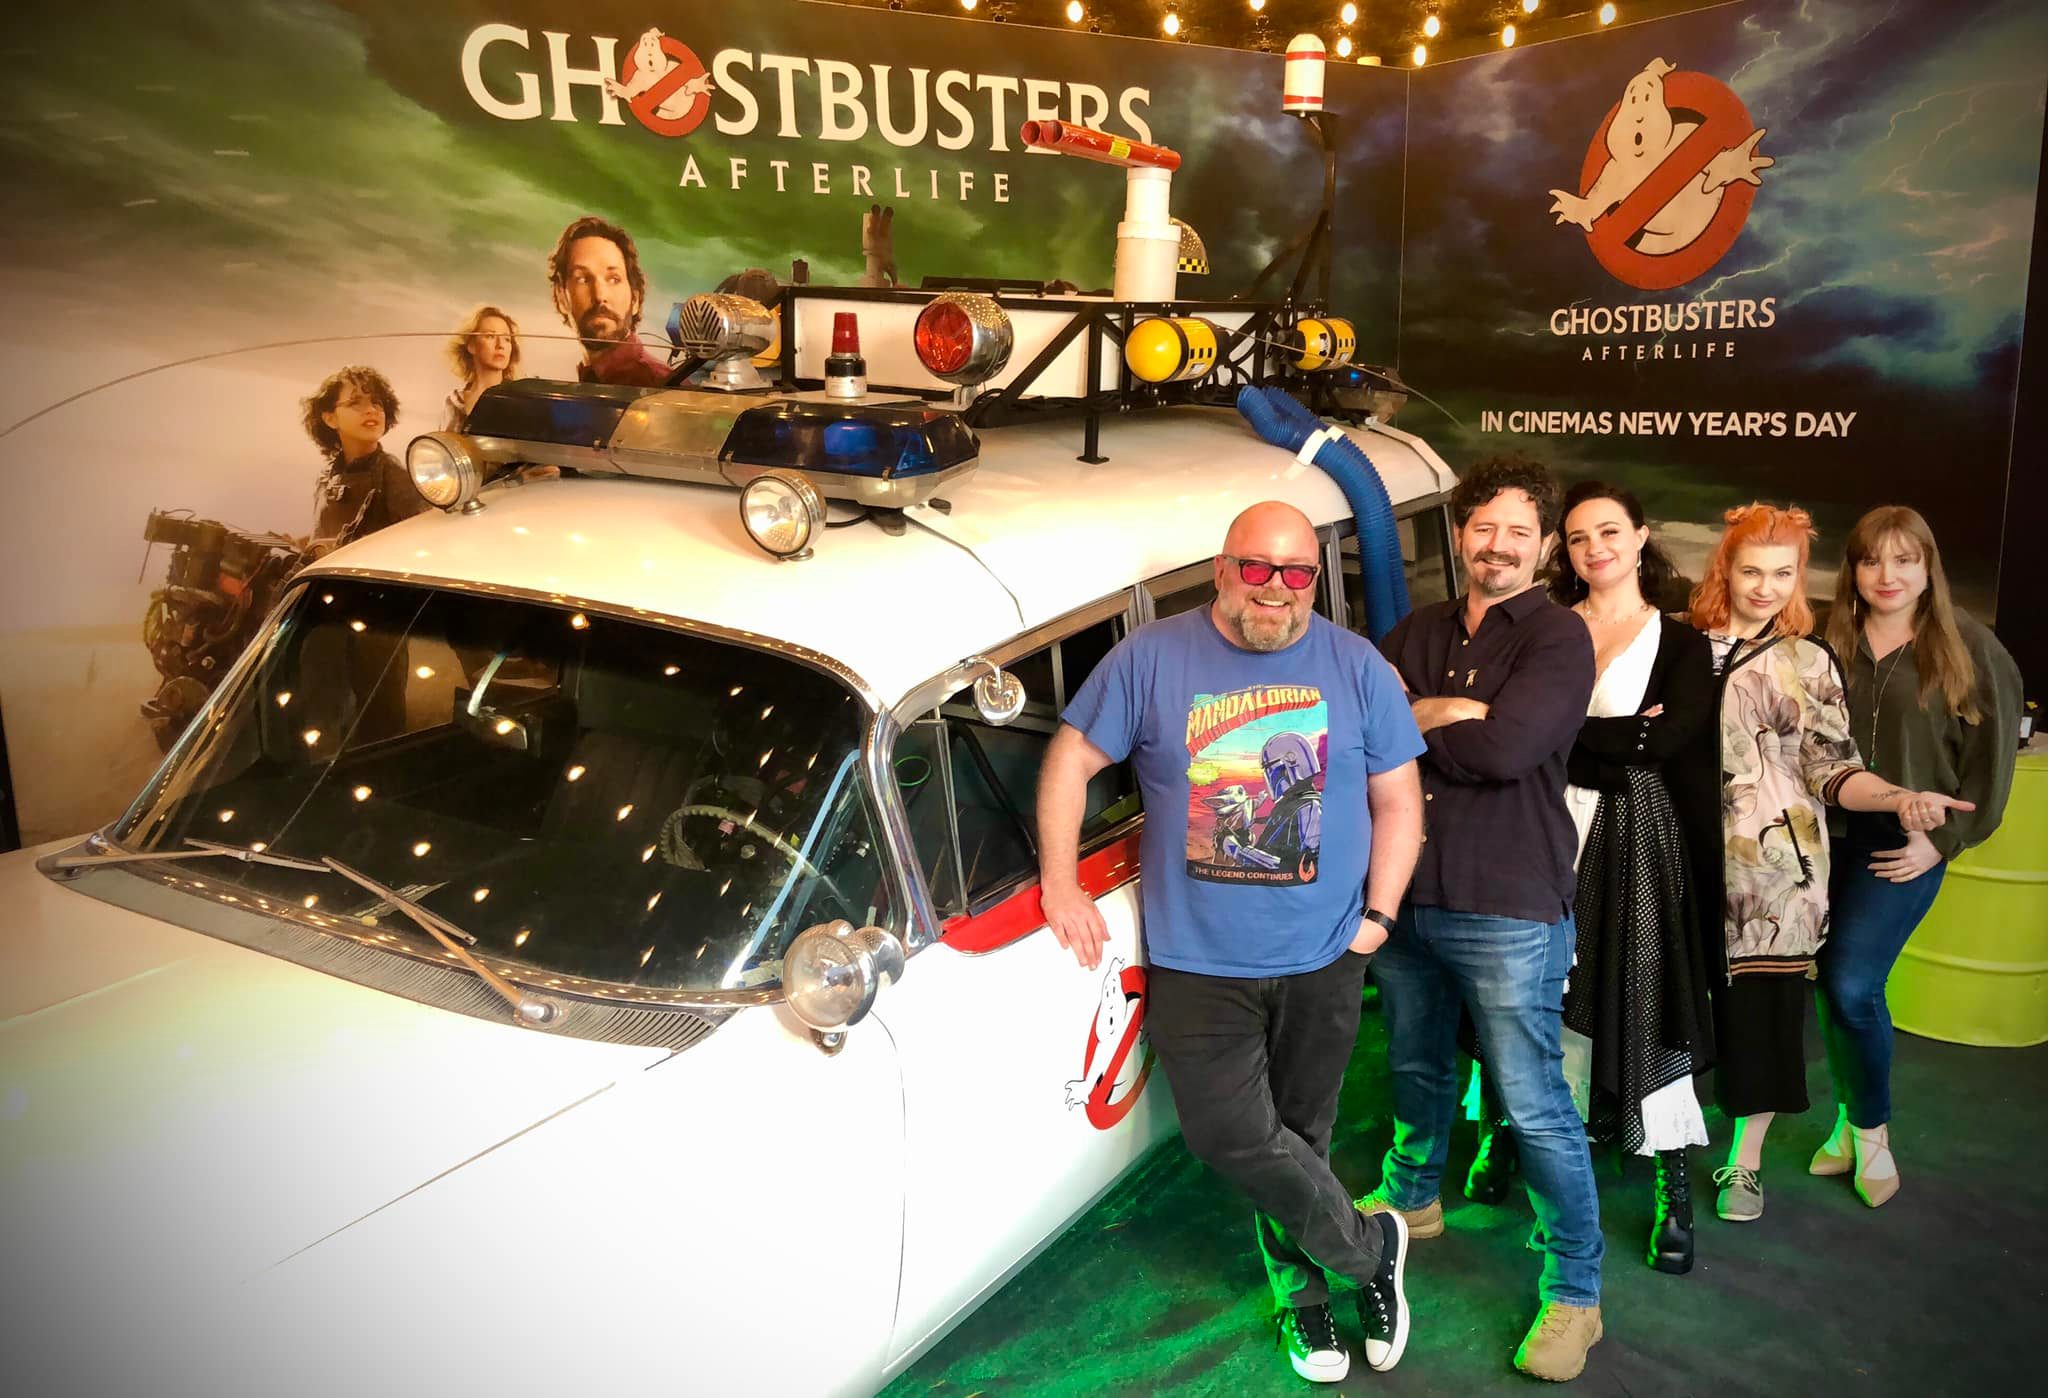 the team of Quinny, Dion, Bec, Peta and Jill pose in front of an Ecto 1 replica vehicle